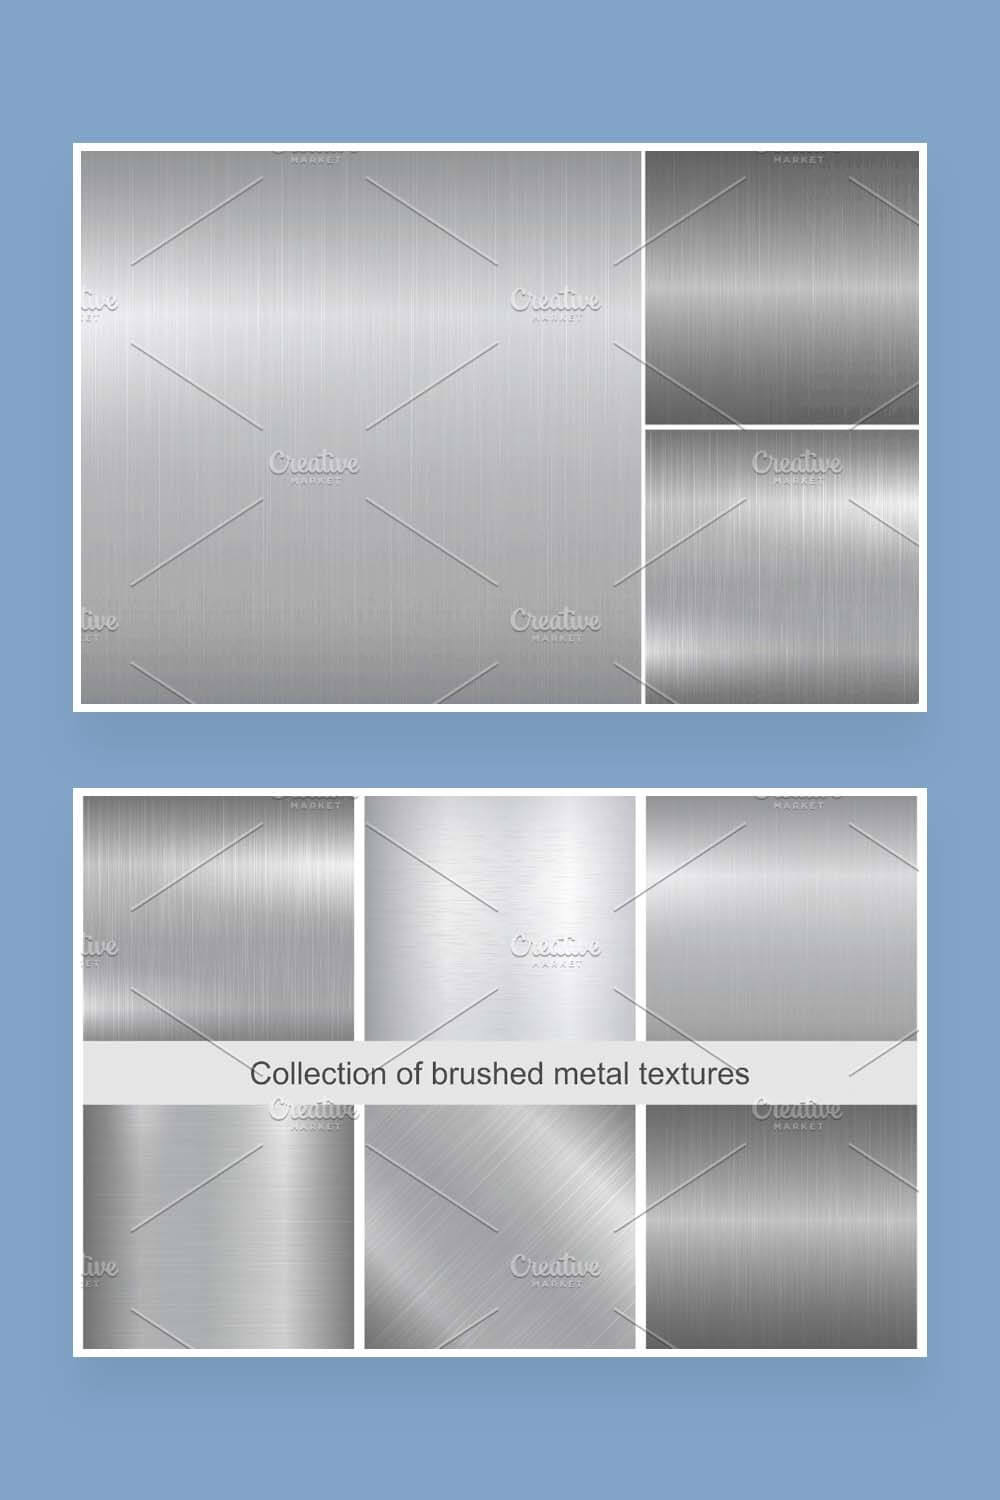 The two pictures are drawings of six different silver metal textures.